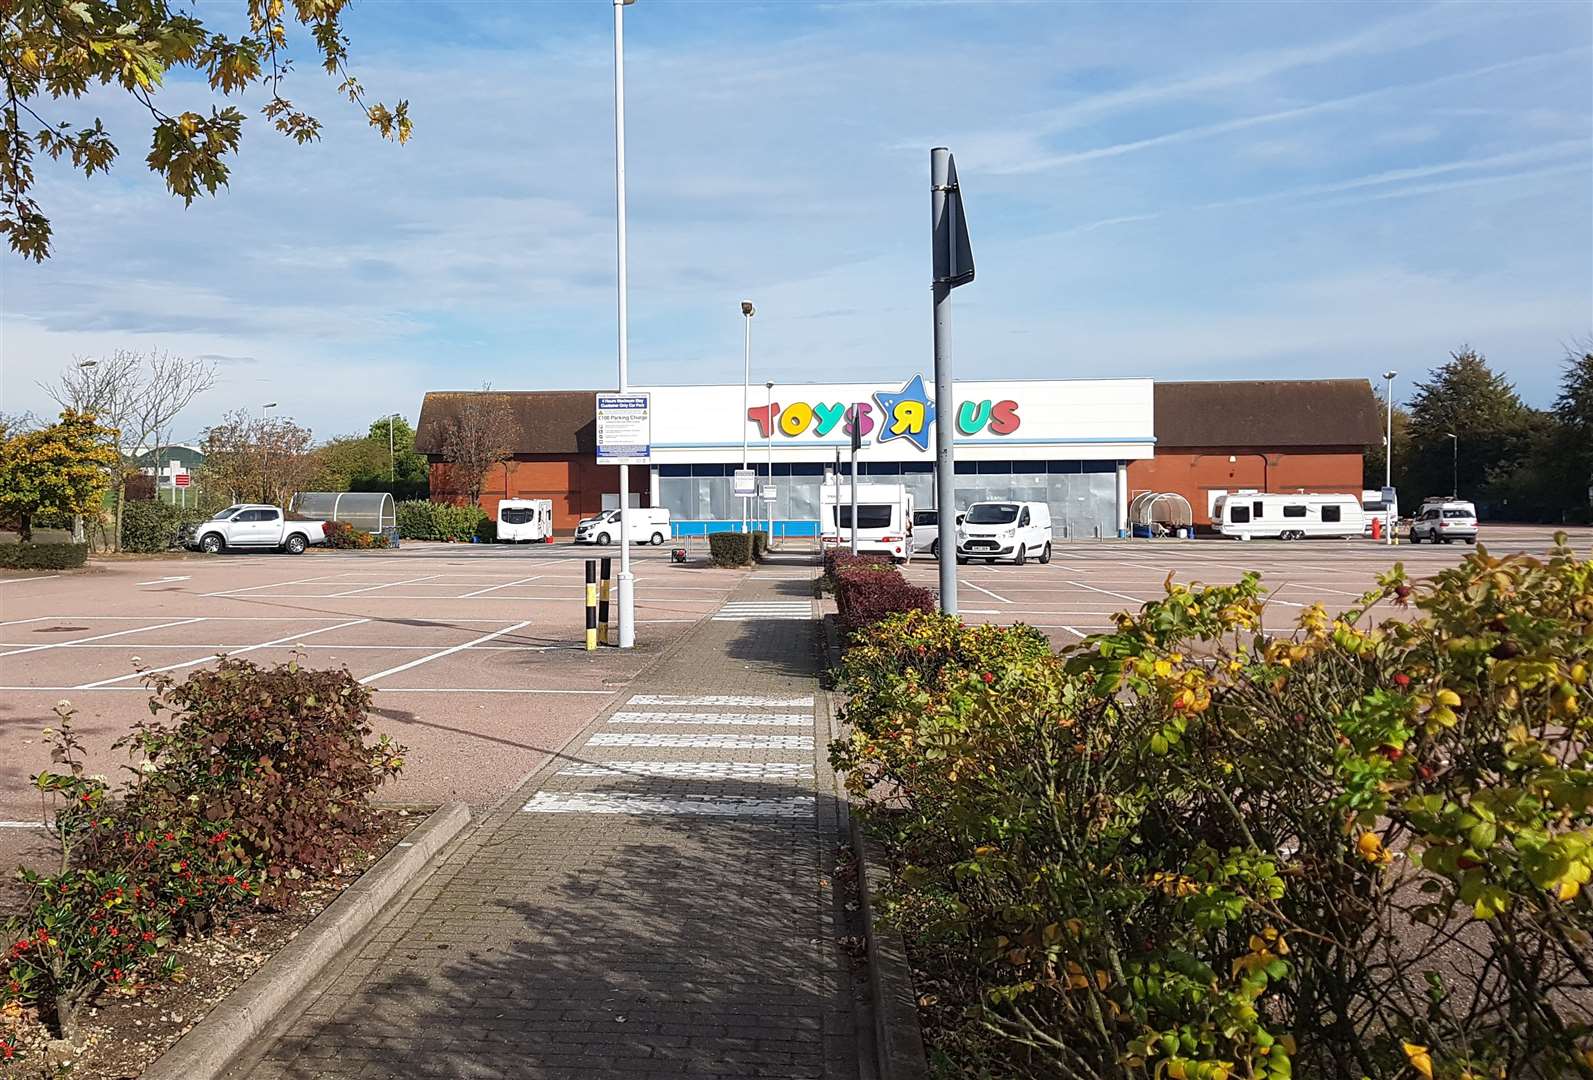 The old Toys R Us building in Horsted Retail Park will be transformed